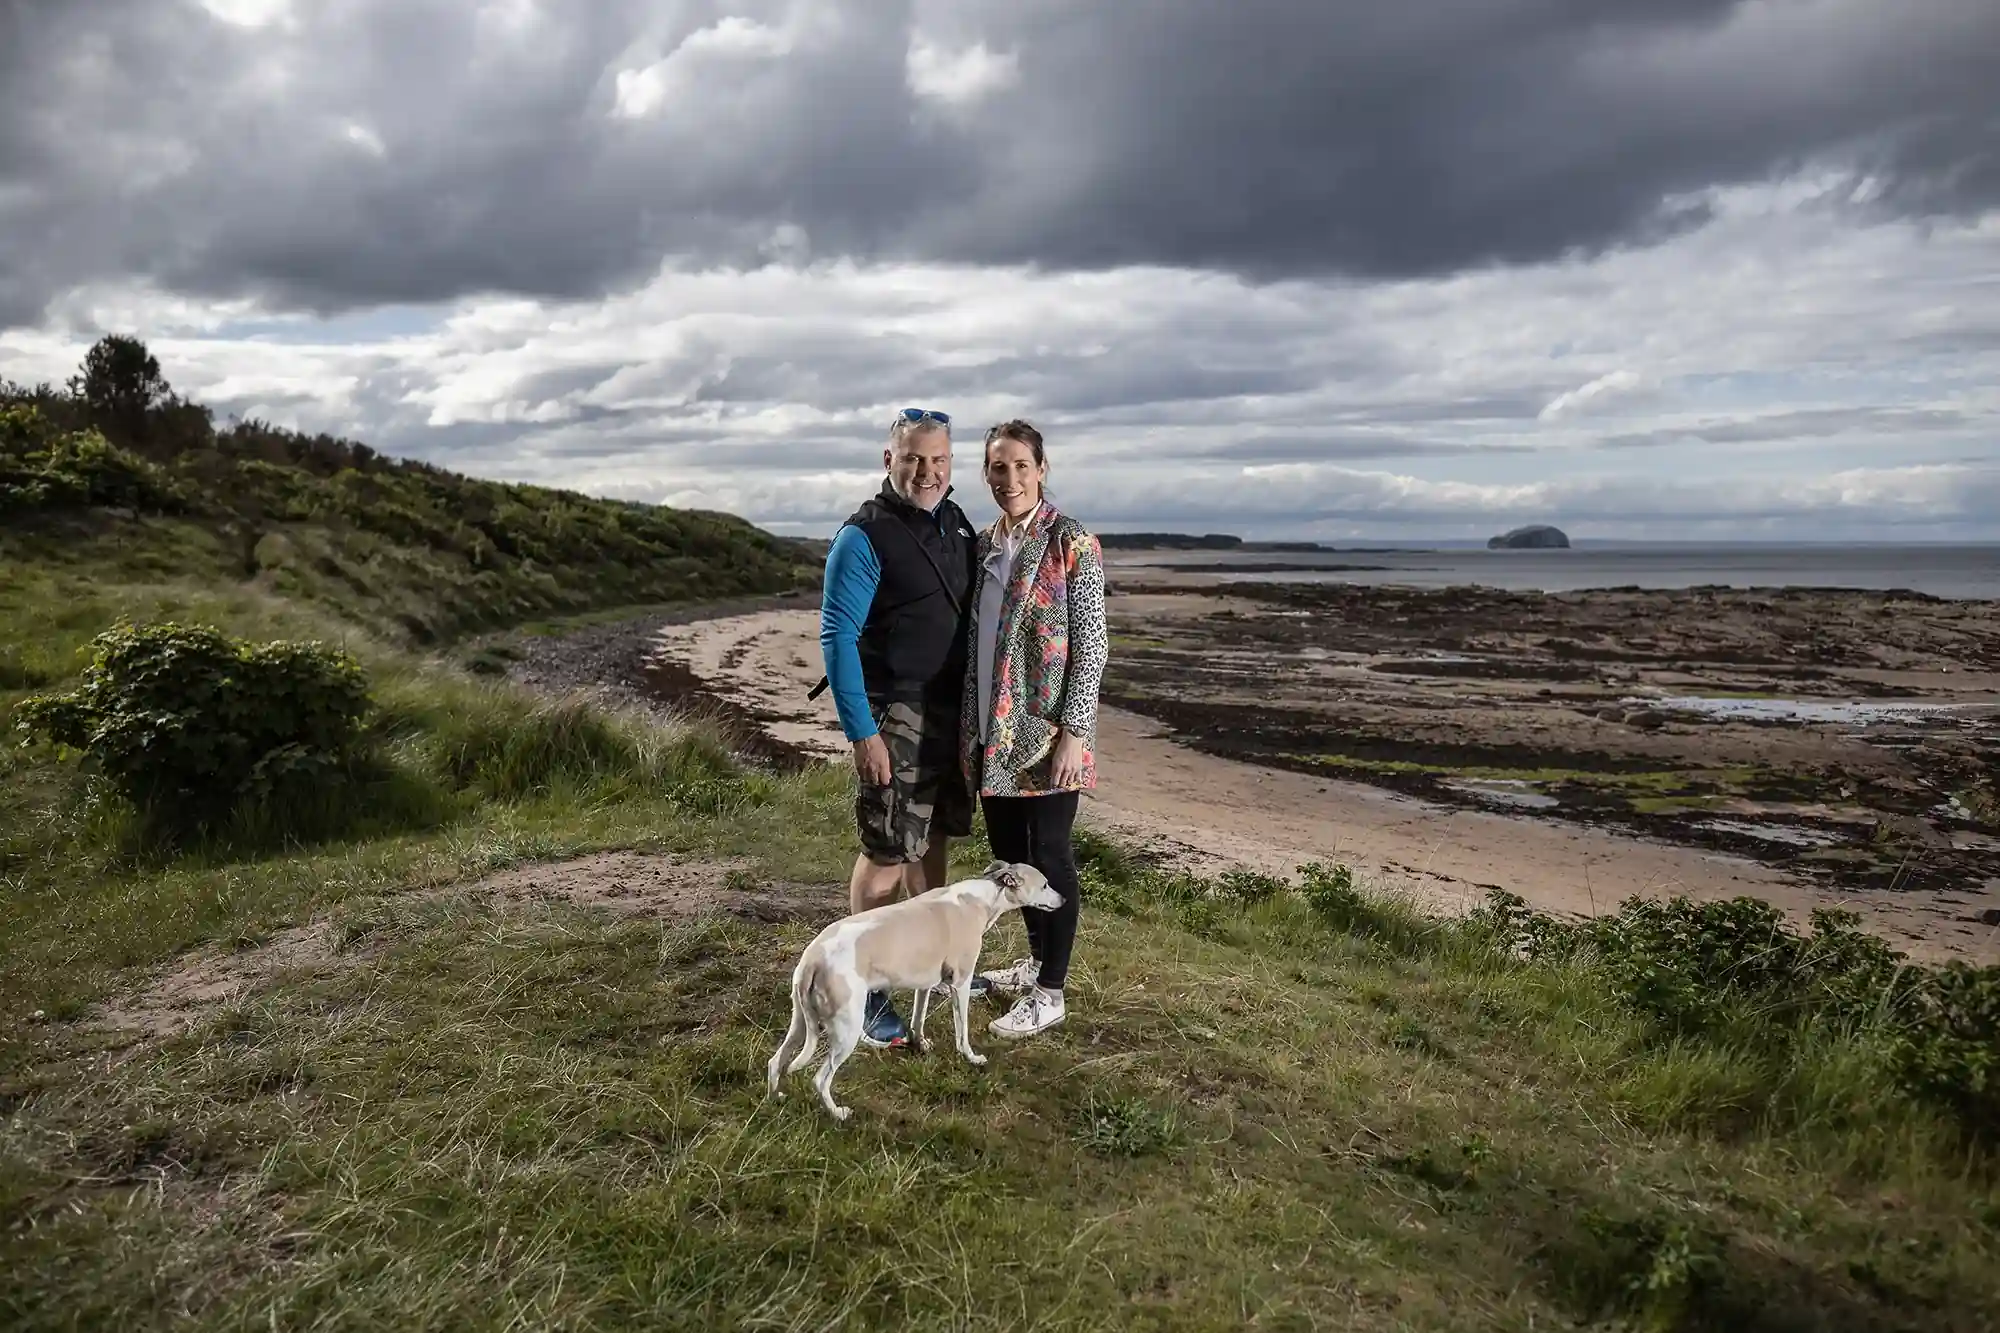 A couple with a dog standing by a coastal pathway under a cloudy sky, with the ocean and a distant island in the background.